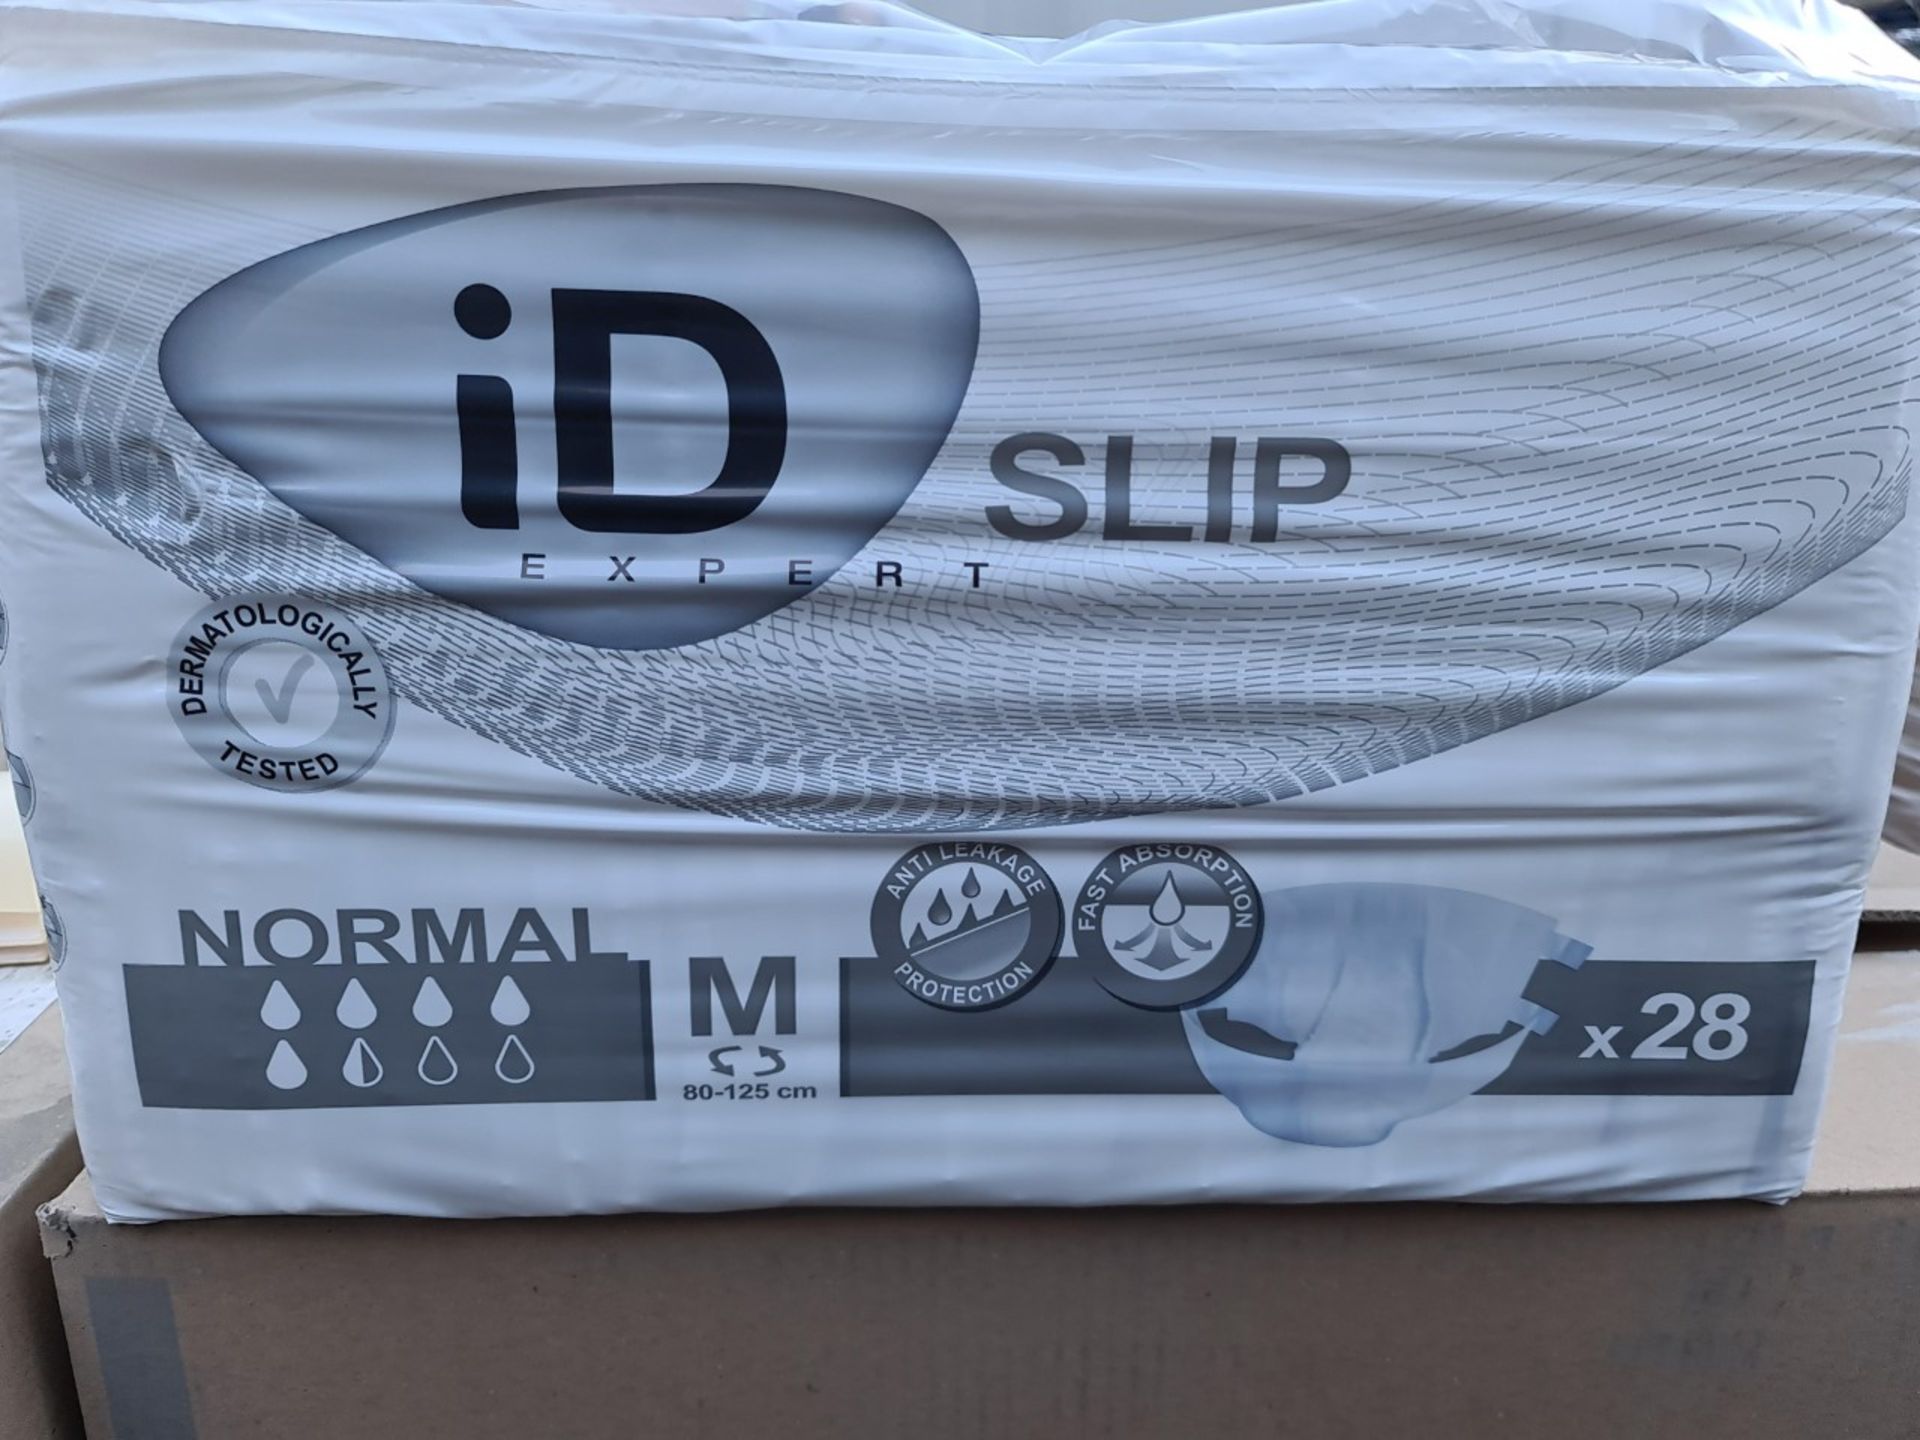 (J17) PALLET TO CONTAIN 48 x PACKS OF 28 ID SLIP EXPERT ULTRA ABSORBENT DISPOSABLE ALL IN ONE BRIEFS